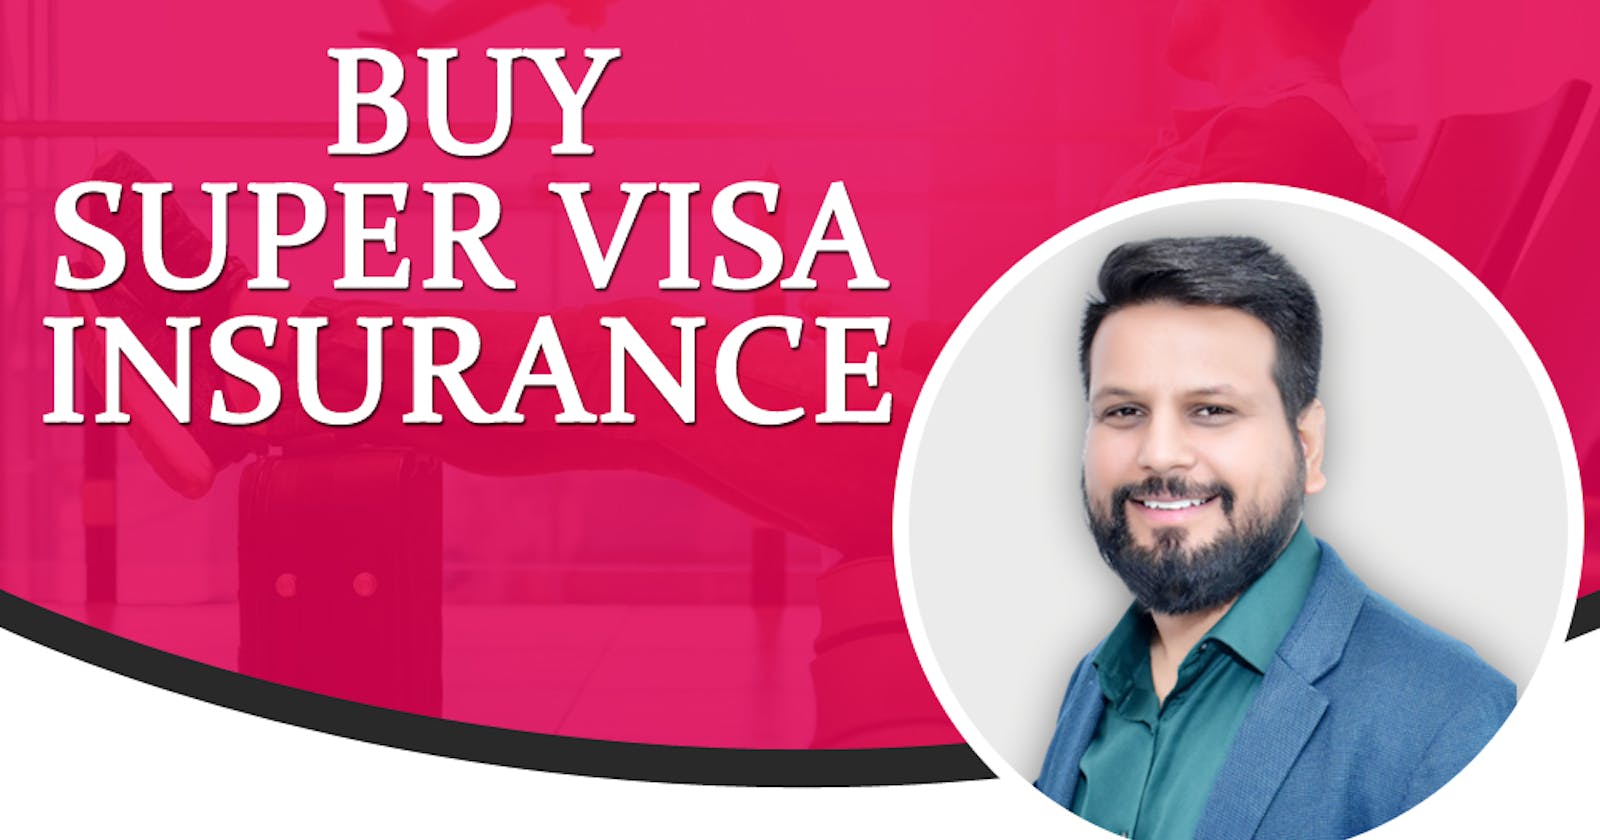 Secure Your Loved Ones' Future with Super Visa Insurance